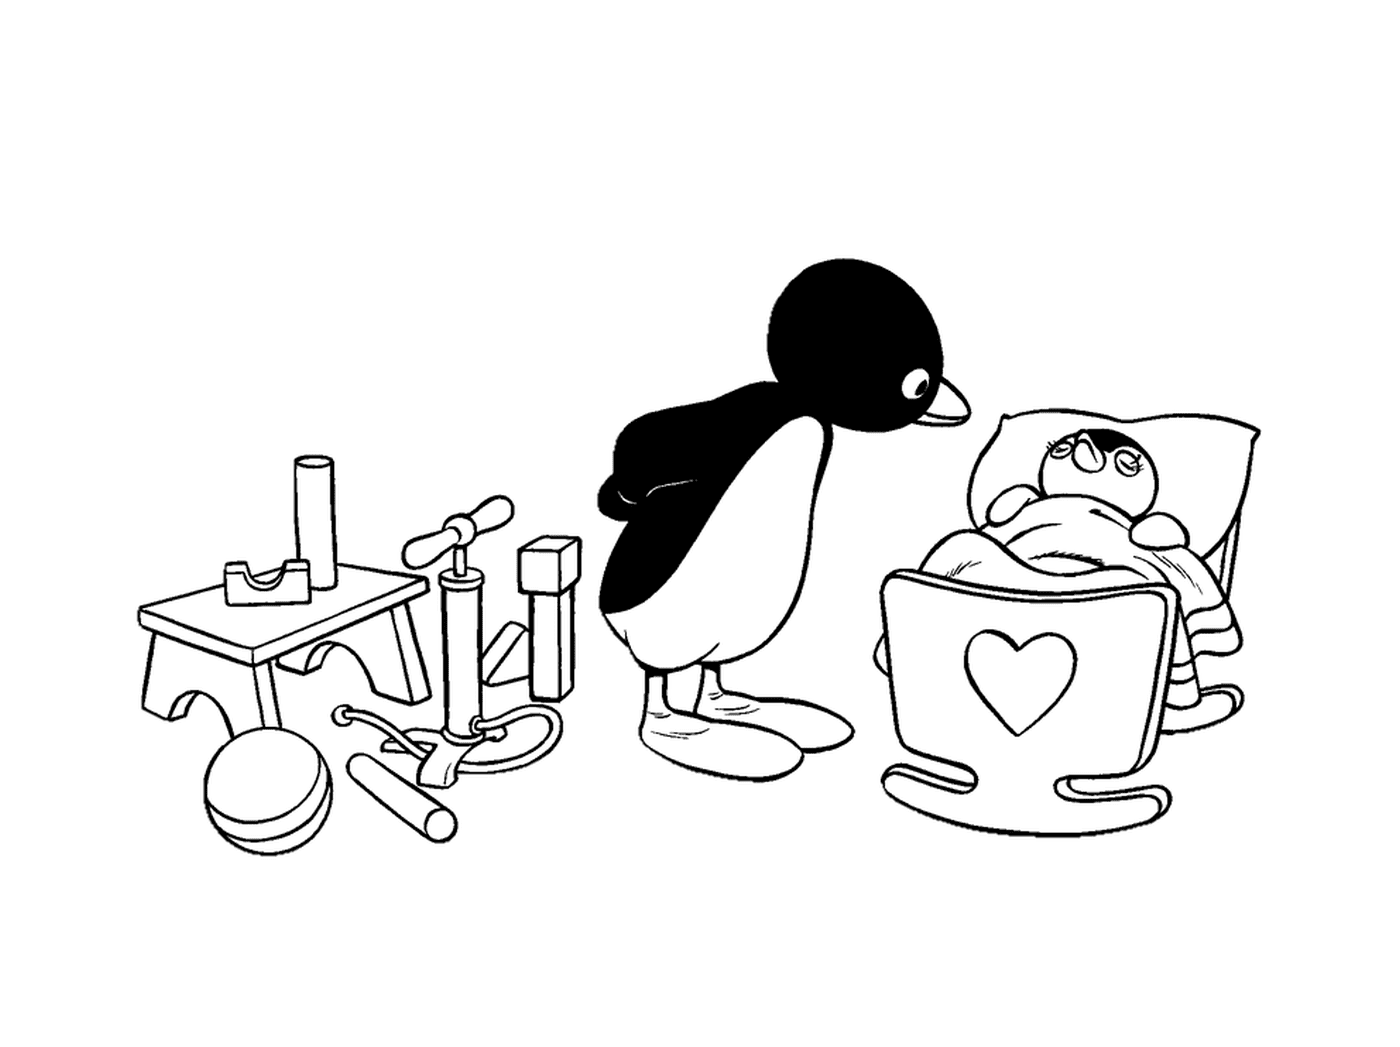  Penguin and baby penguin in a bowl 